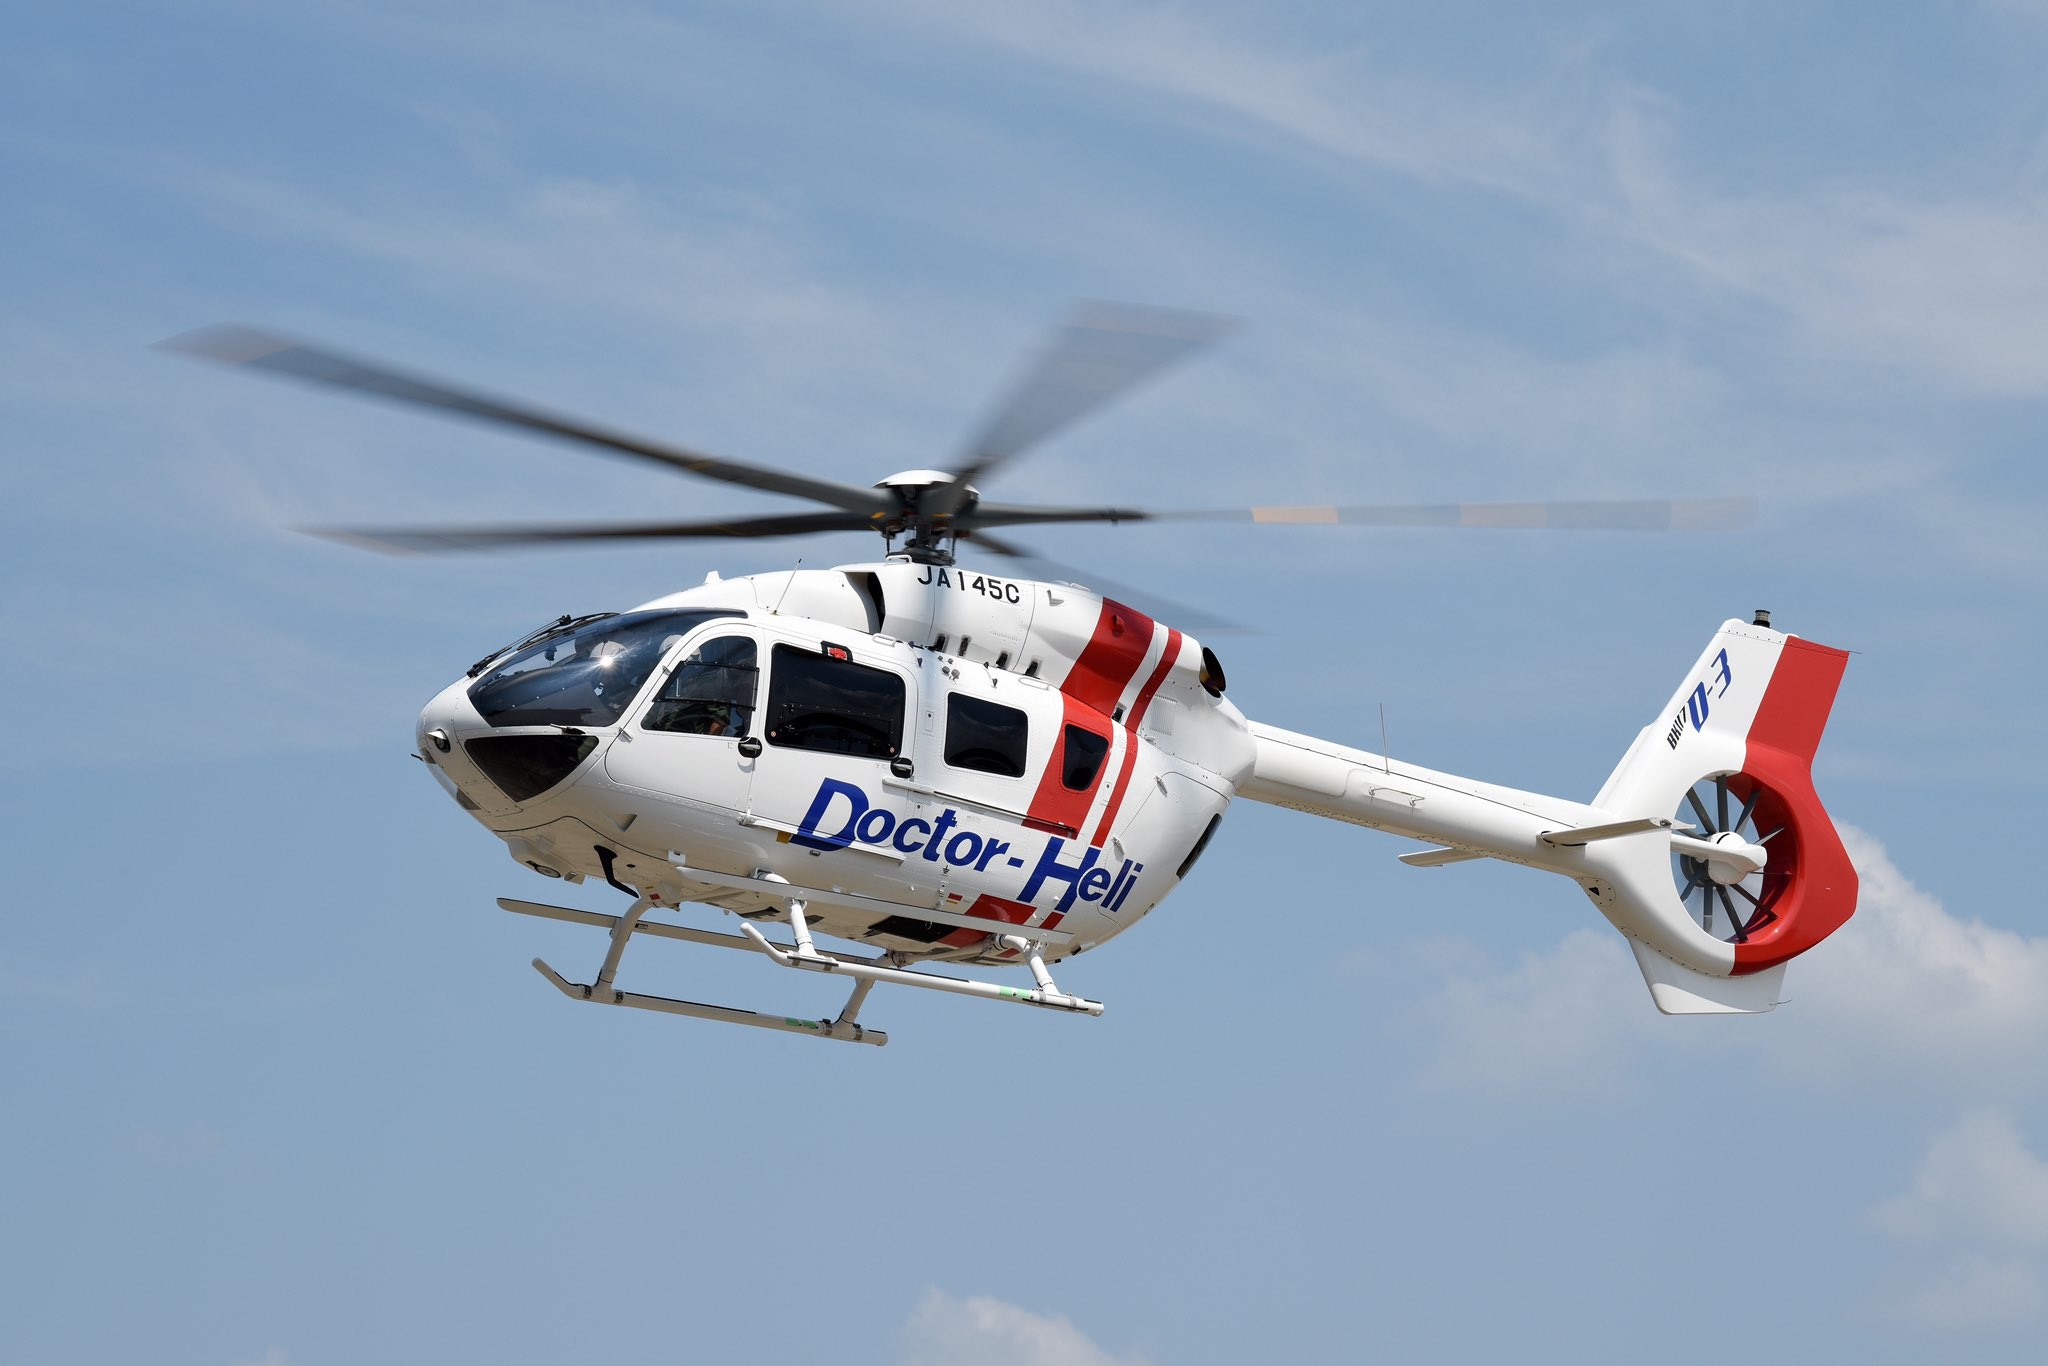 Domestic Push - Kawasaki  Heavy  Industries  delivered  it's  1st  five-bladed  H145 (BK117 D-3)  Helicopter  to ' Doctor-Heli'  in  Japan !